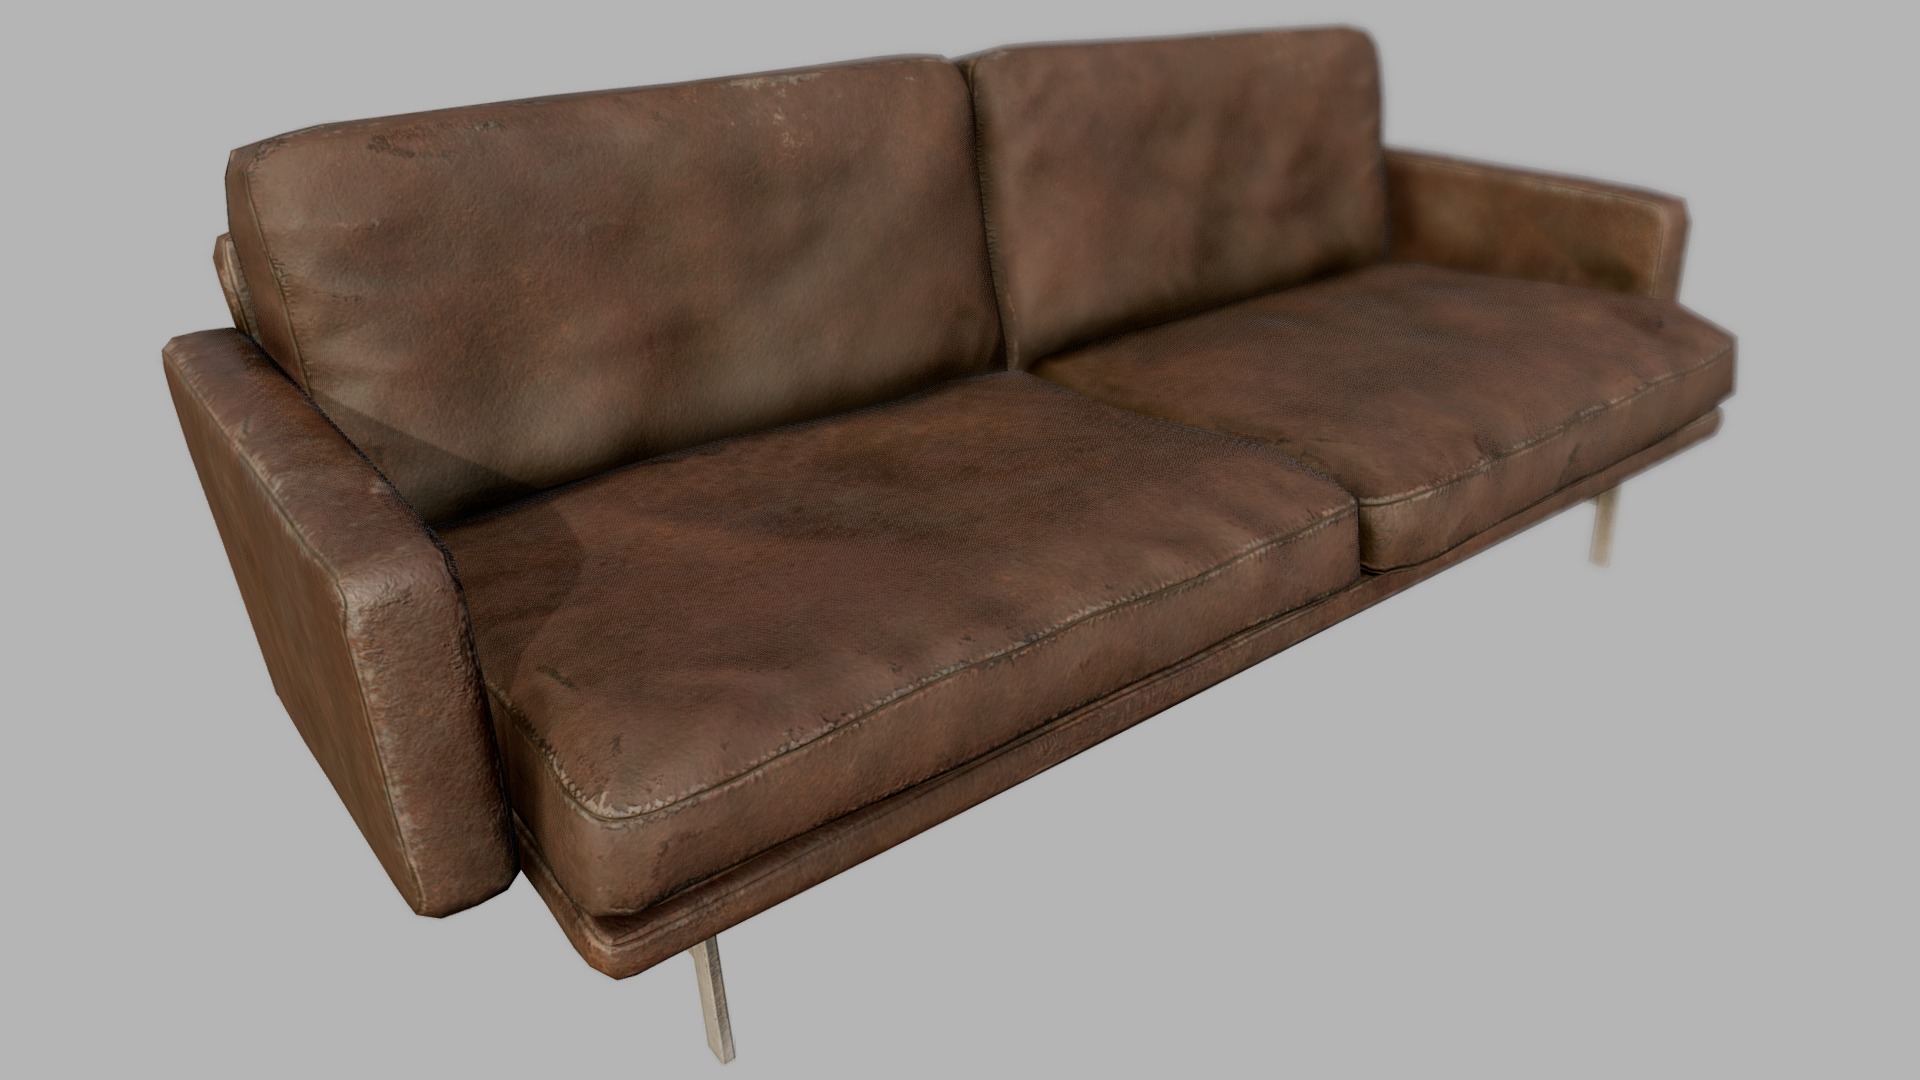 3D model Design Couch 1 – Brown – Post-Apocalypse – PBR - This is a 3D model of the Design Couch 1 - Brown - Post-Apocalypse - PBR. The 3D model is about a brown leather couch.